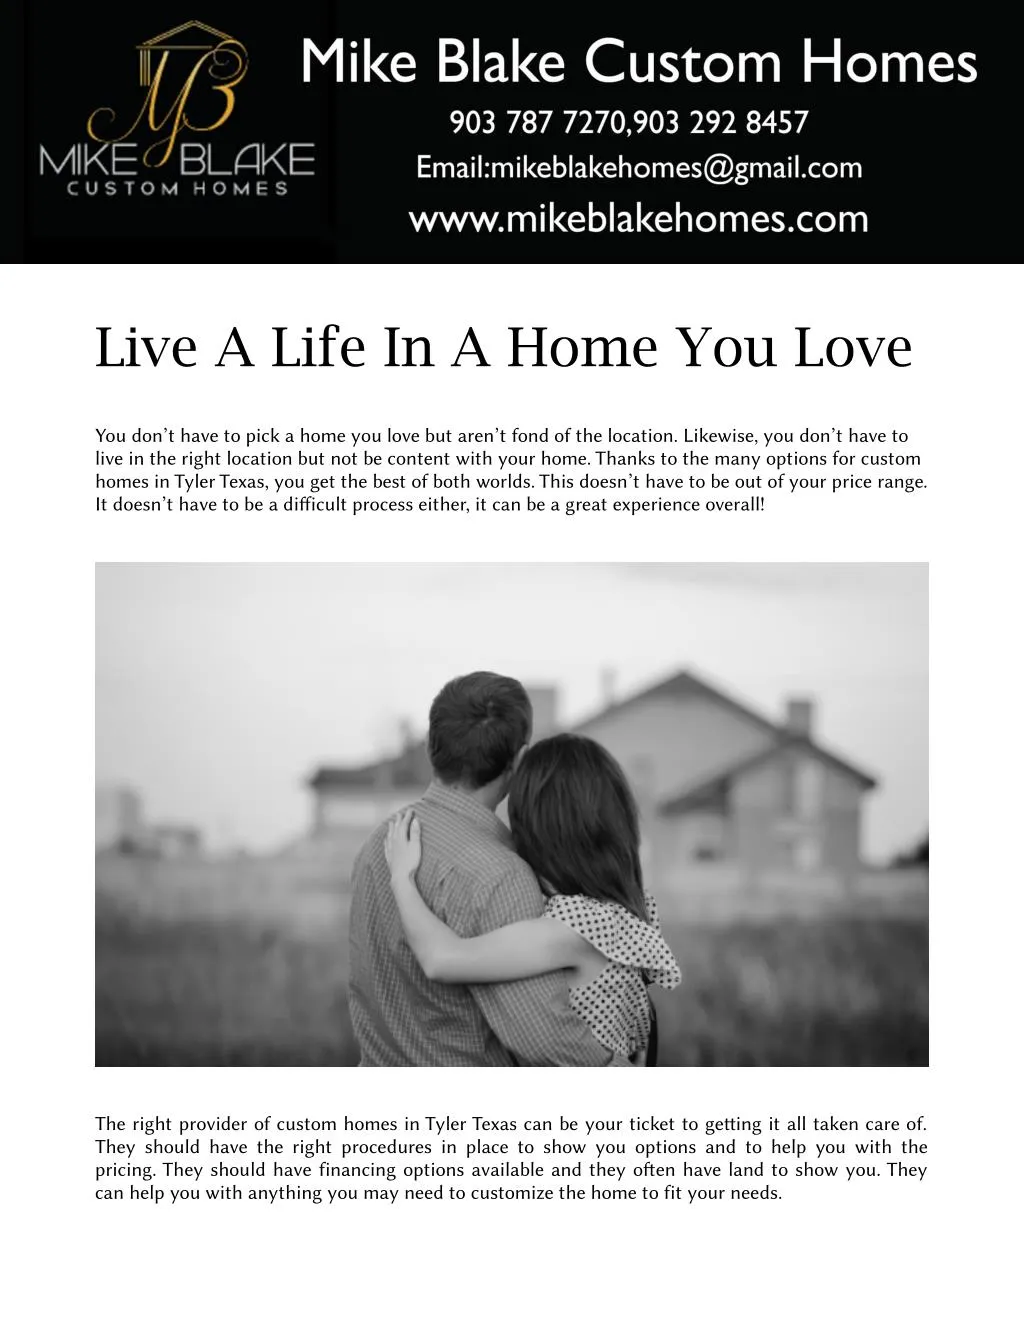 live a life in a home you love